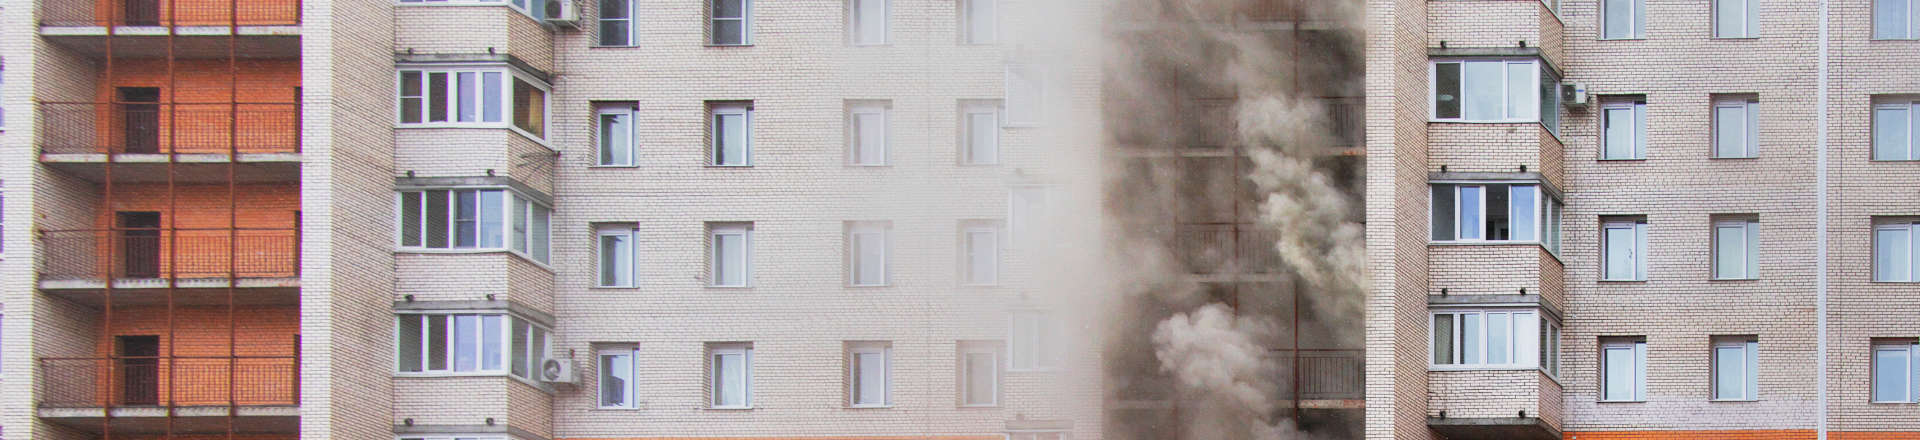 smoke coming out of an apartment building